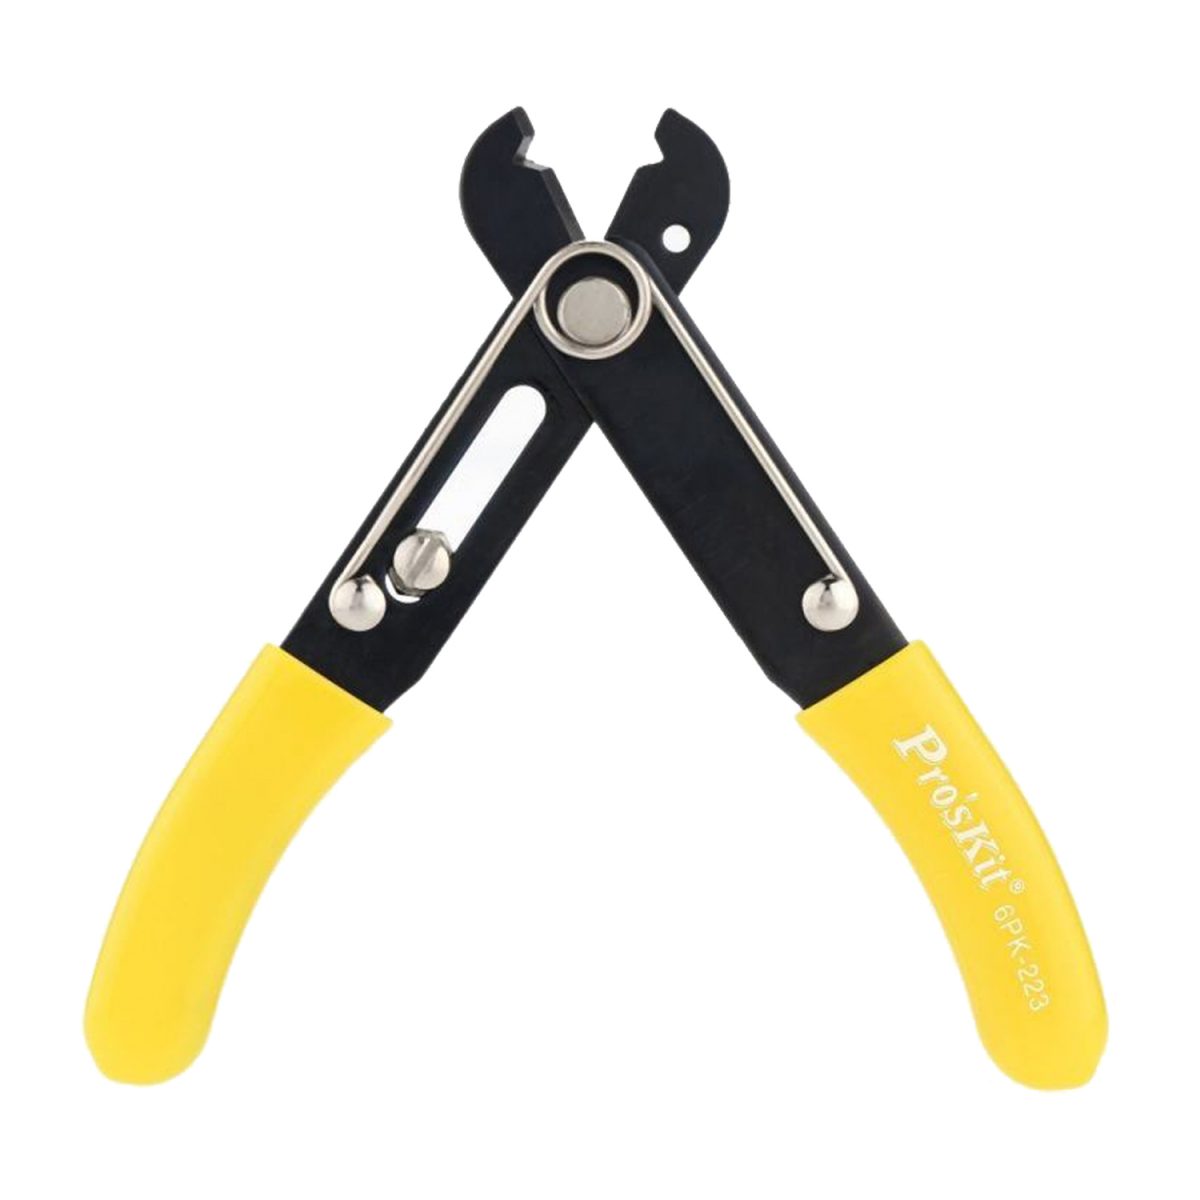 PROSKIT 6PK-223 Adjustable Wire Stripper and Cutter